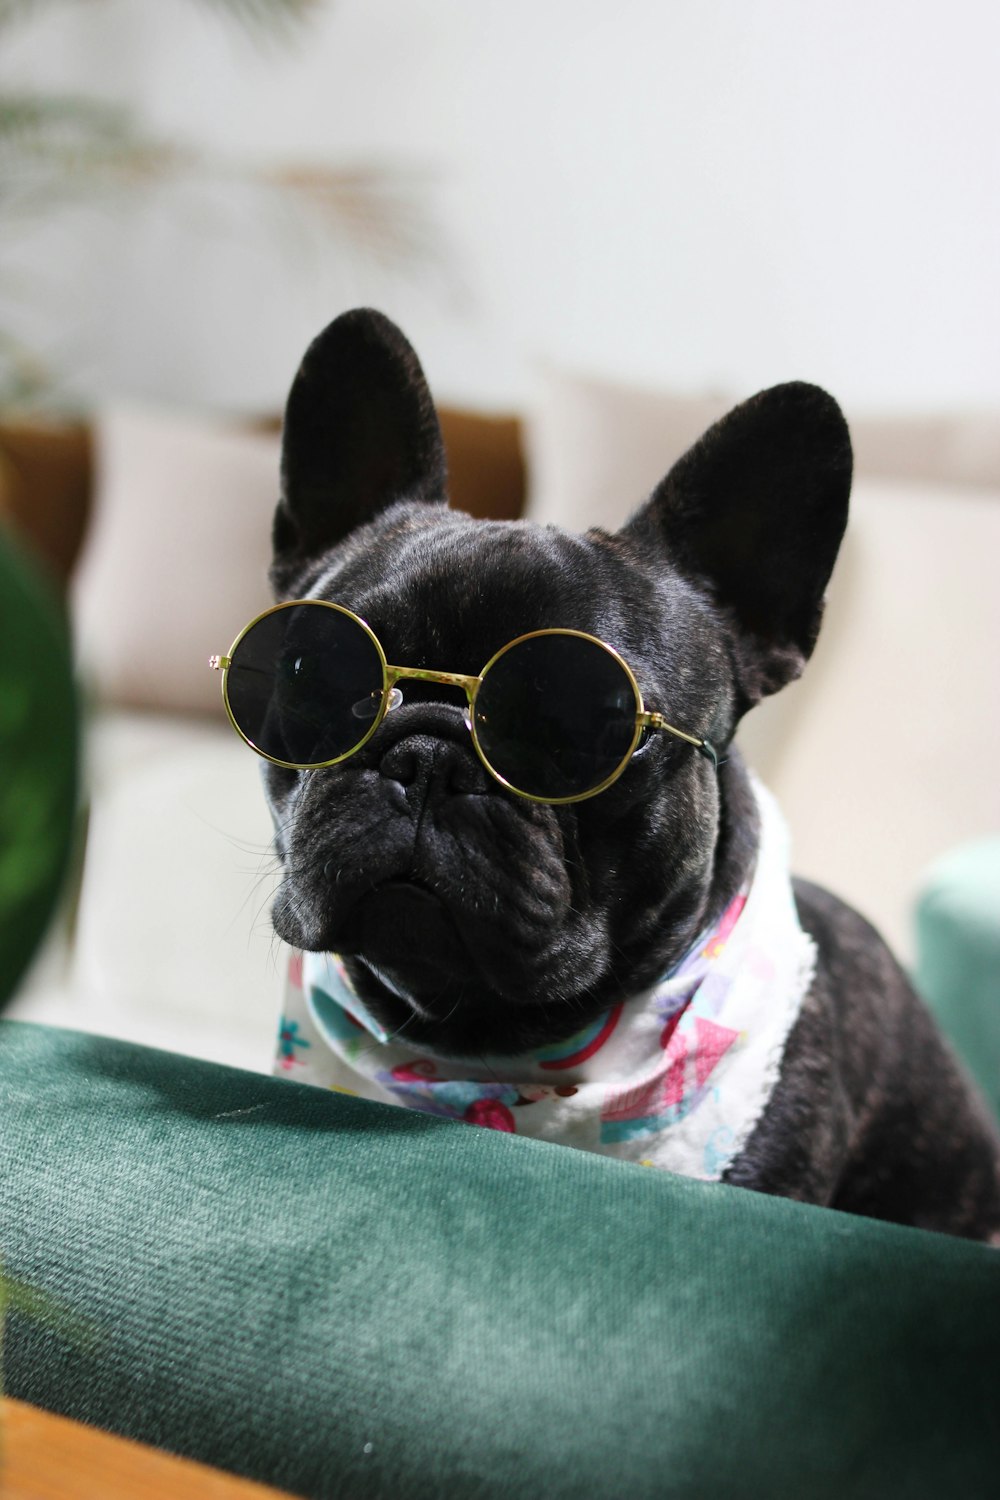 a small dog wearing sunglasses sitting on a chair